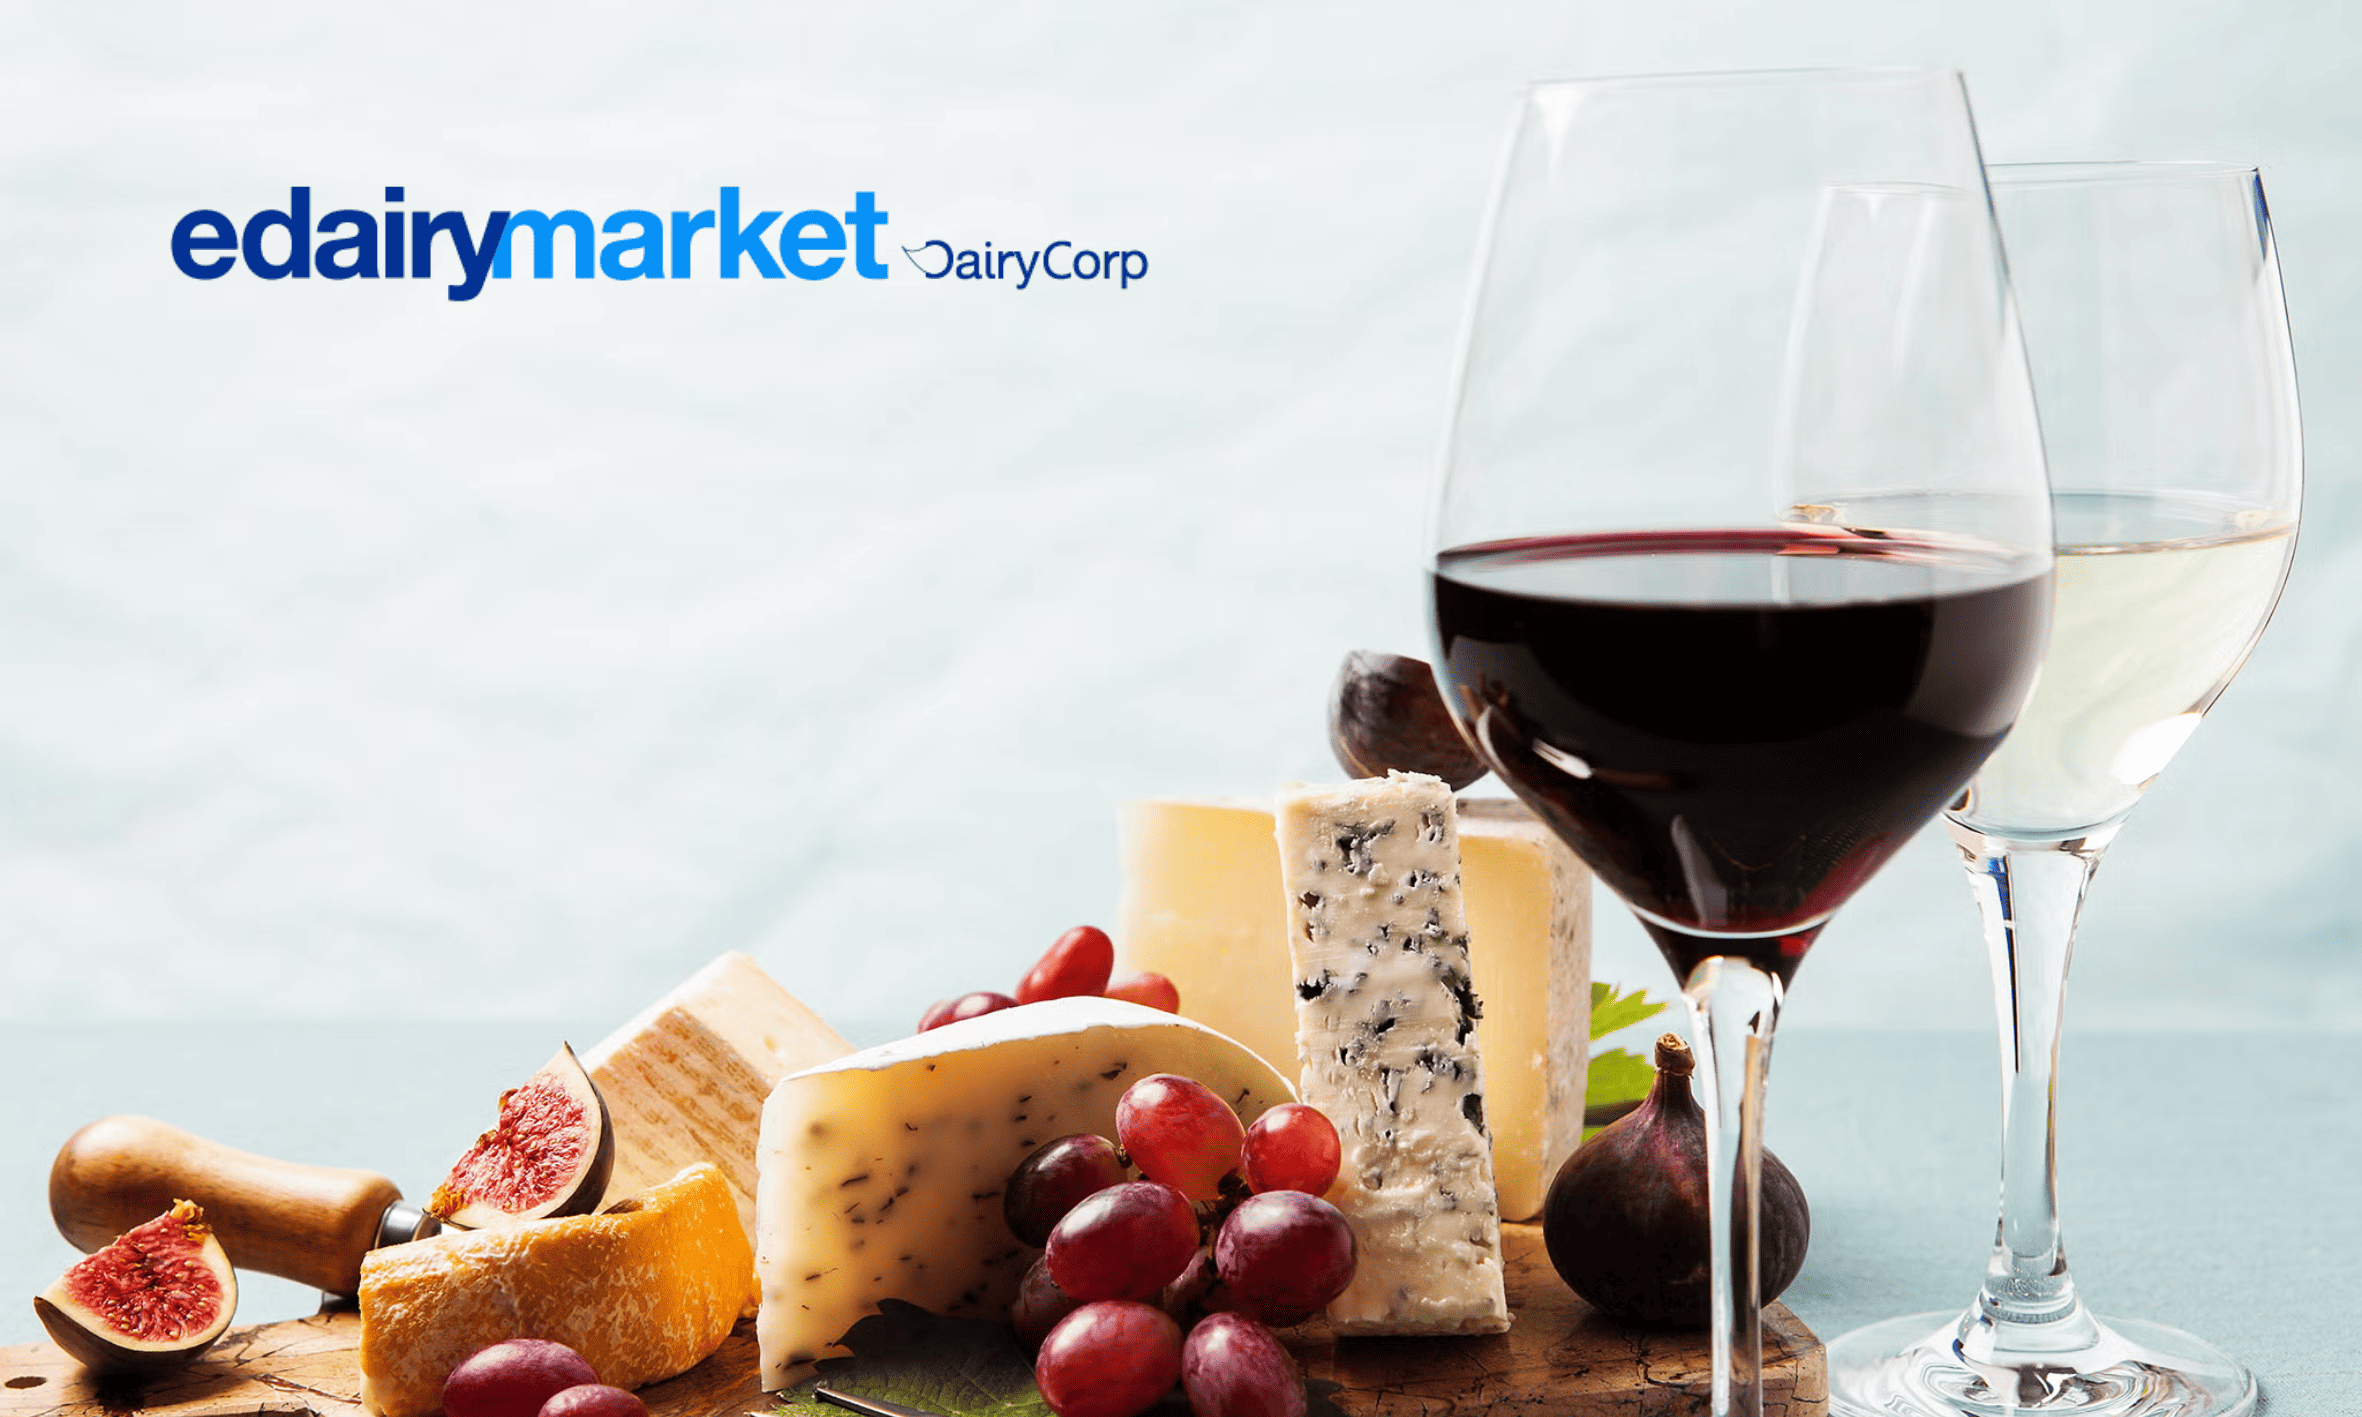 Discover the 5 Cheese and Wine Pairings You Must Try Right Now!